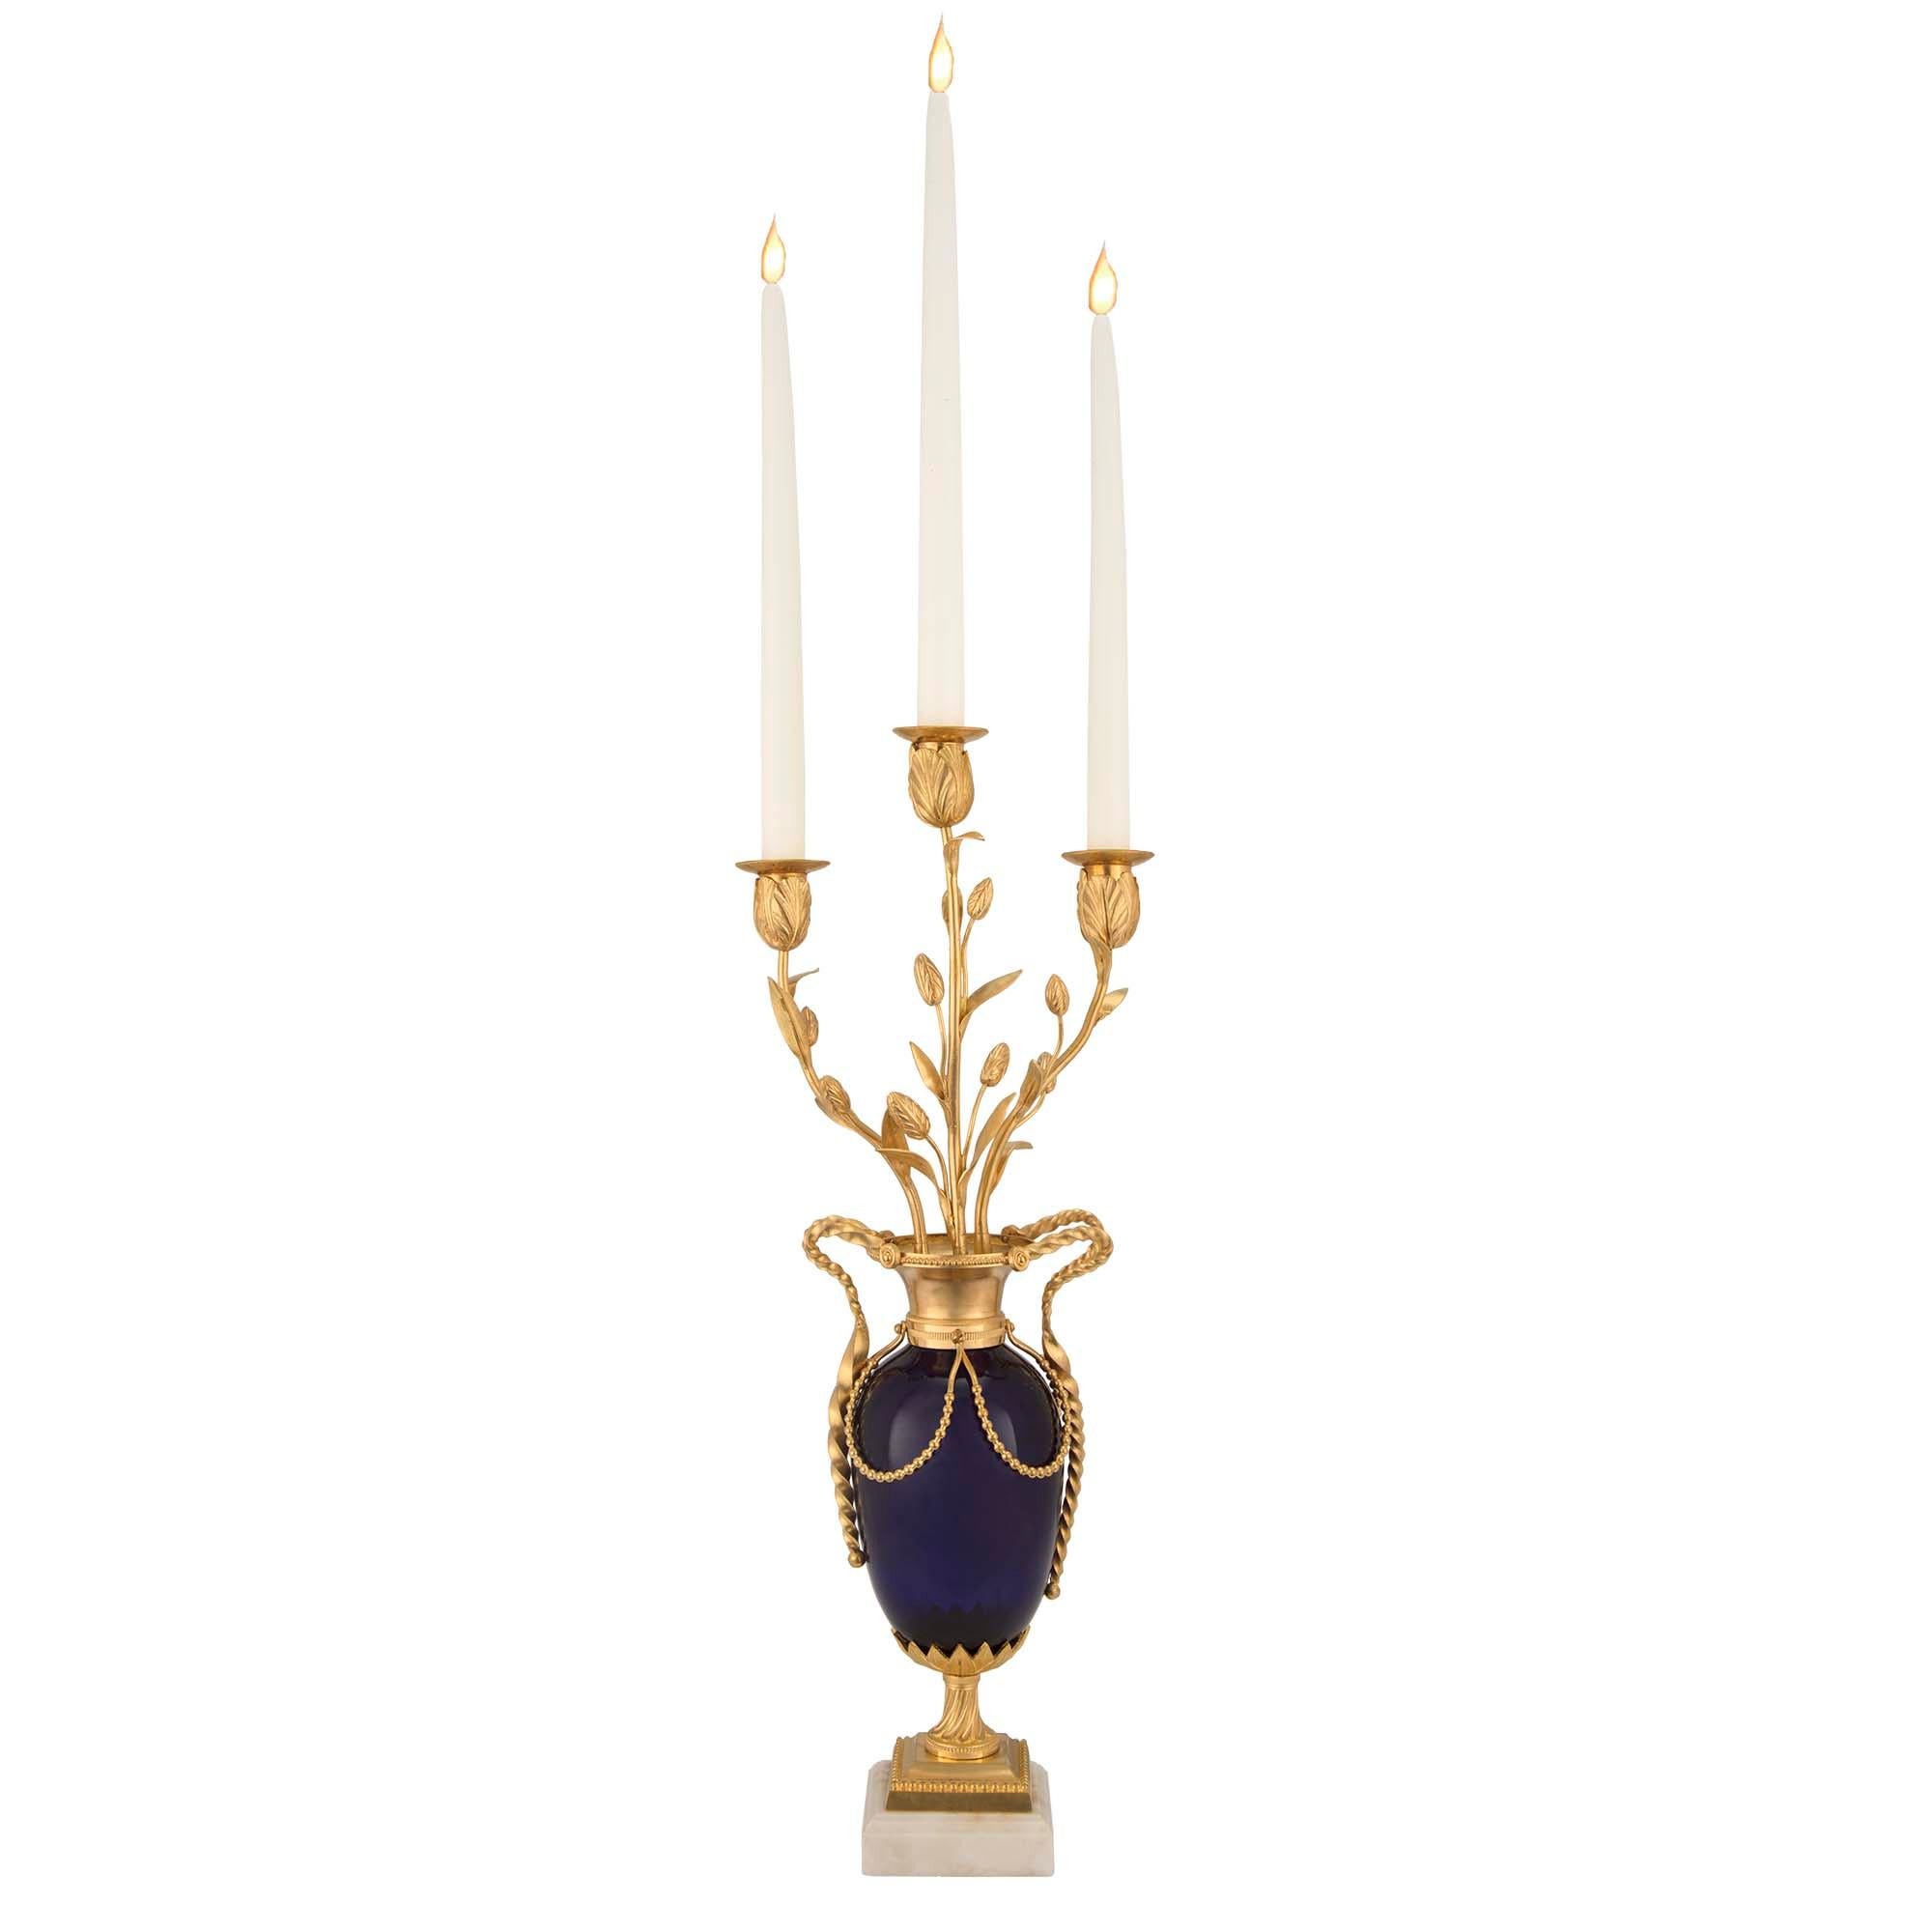 A very elegant pair of French mid 19th century Louis XVI st. cobalt blue glass, ormolu and white Carrara marble three arm candelabras. Each candelabra is raised on a white Carrara marble and ormolu base below the ormolu support, accented with a